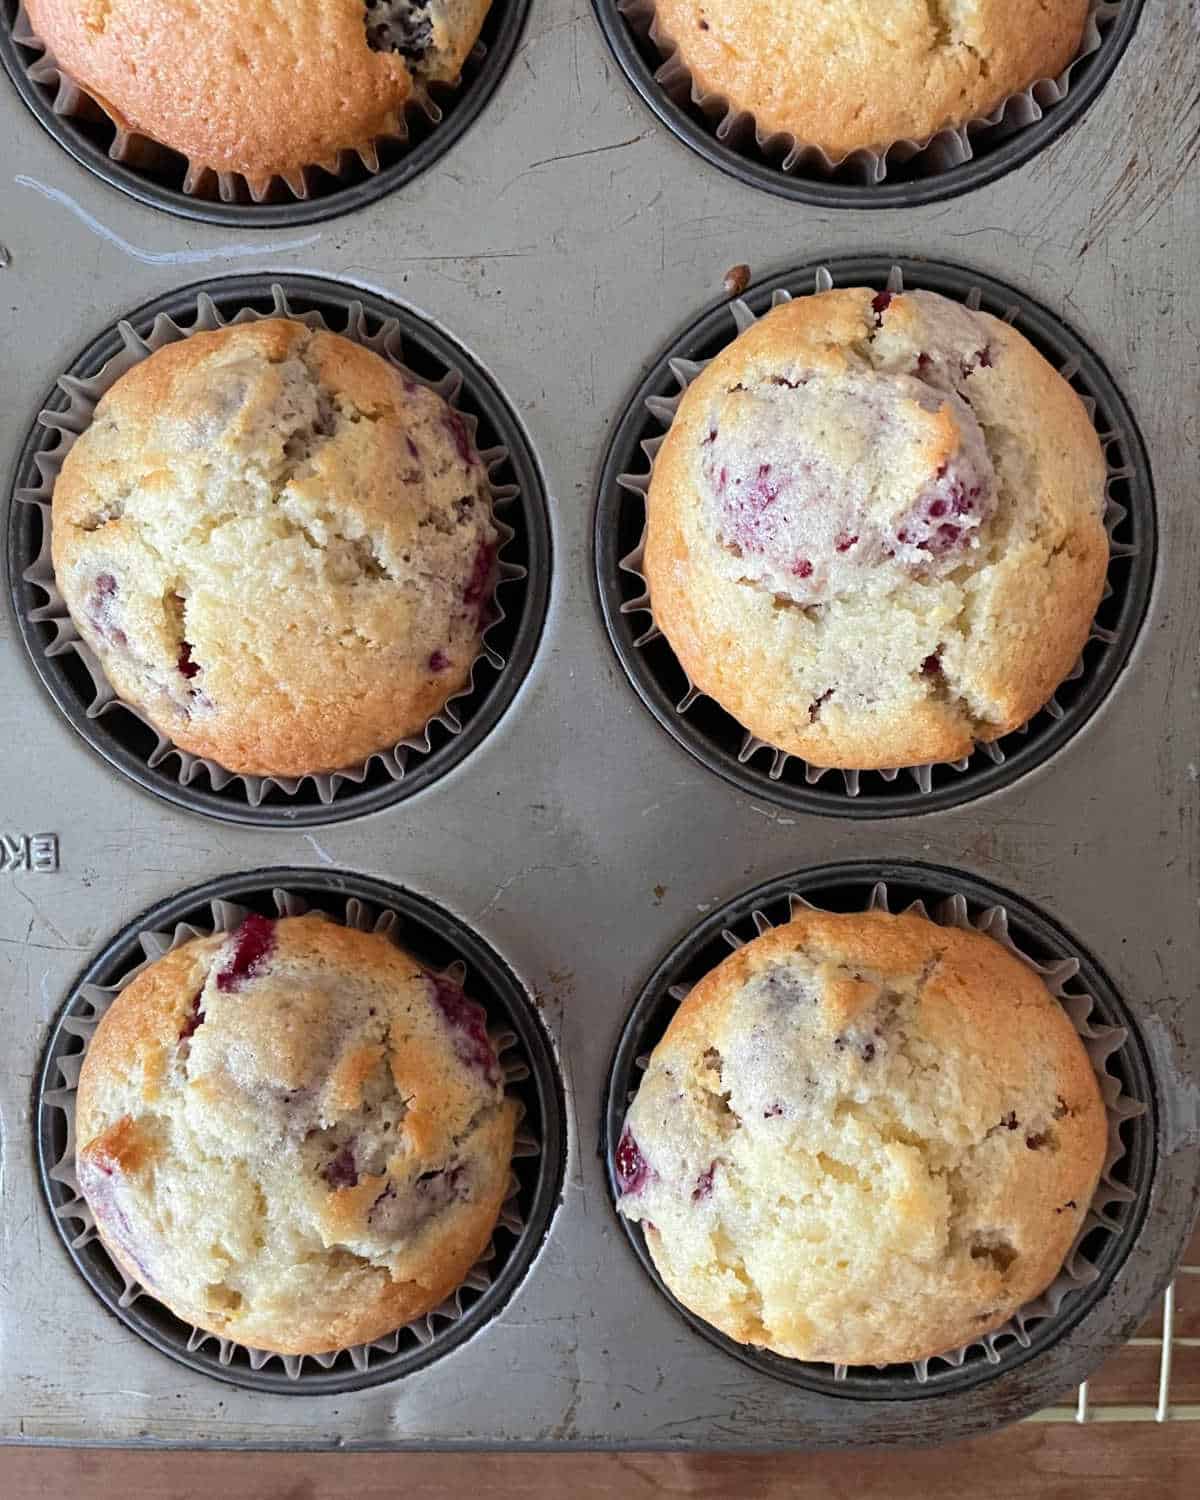 Top view of baked raspberry muffins in a metal pan.